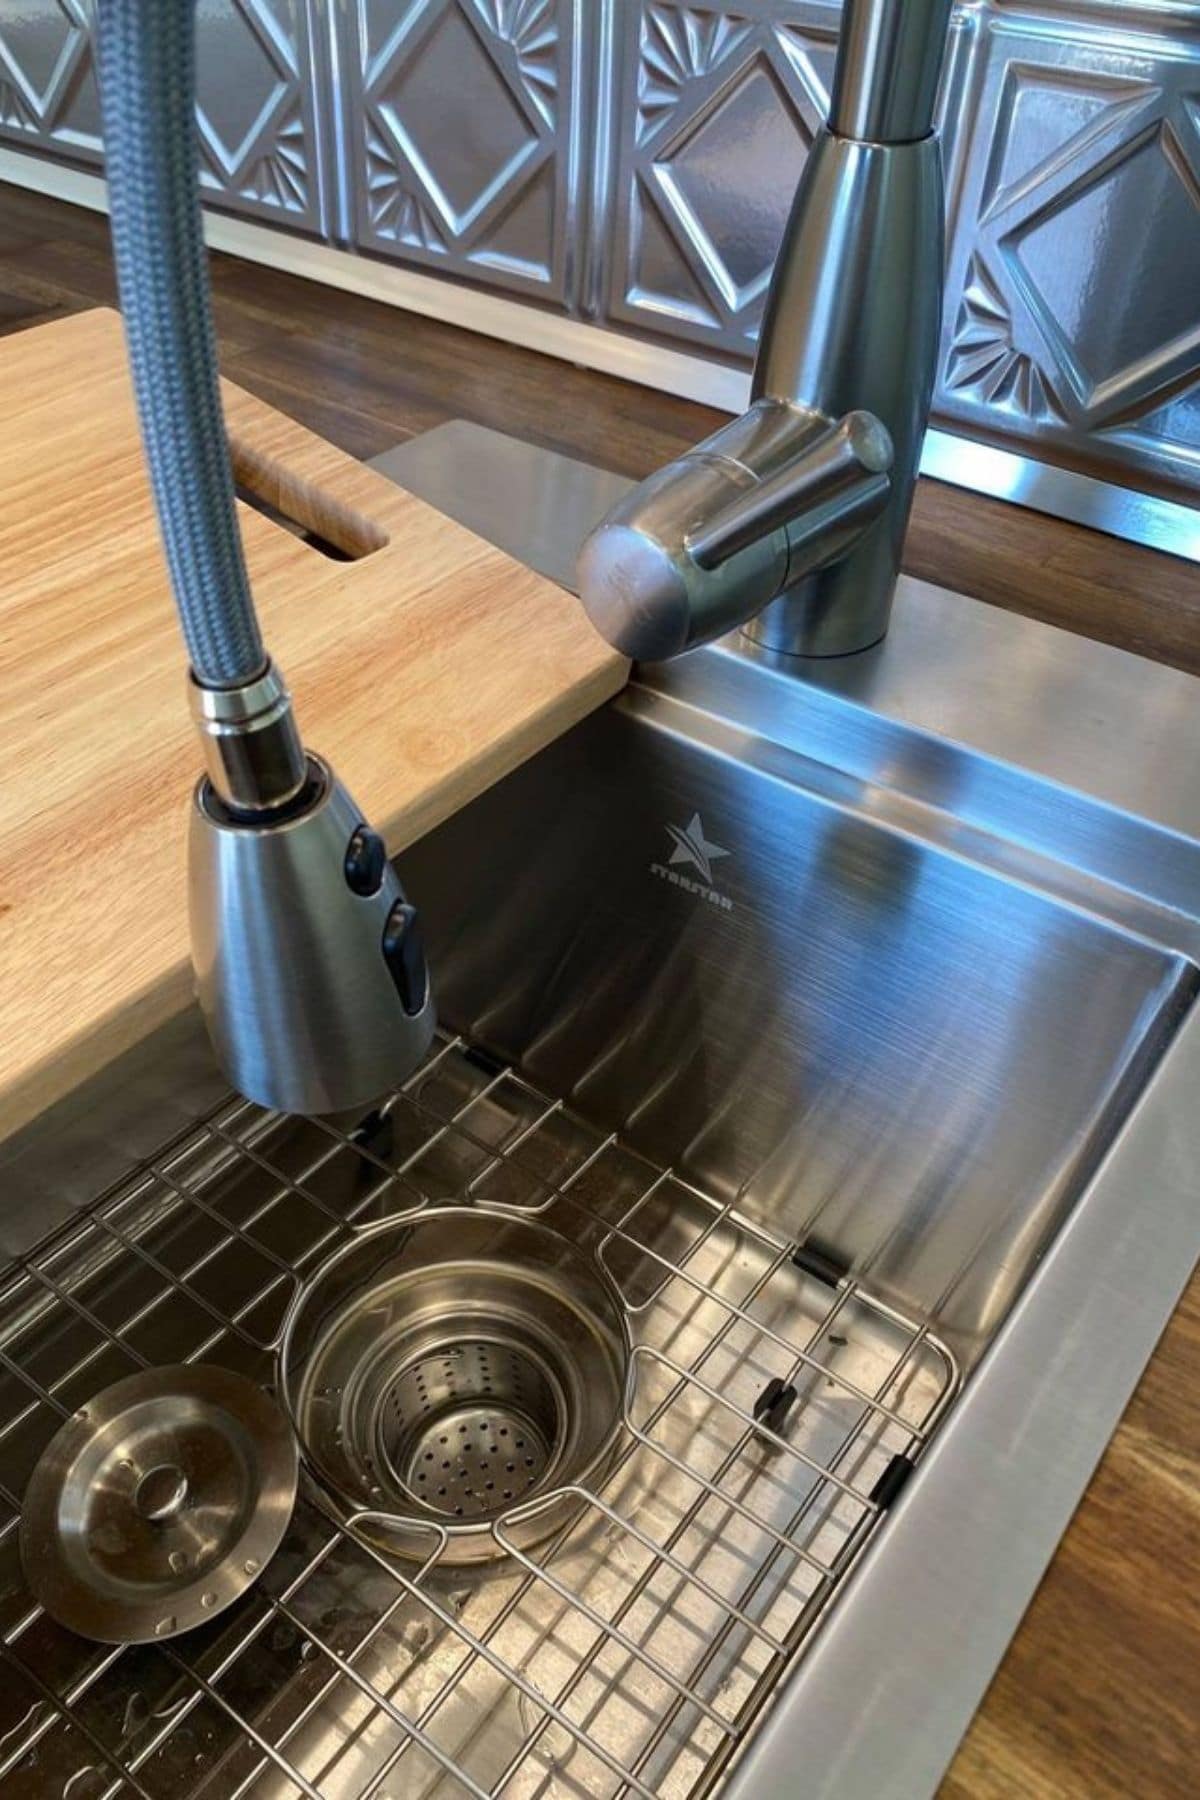 Dish drainer inside stainless steel sink with cutting board on top